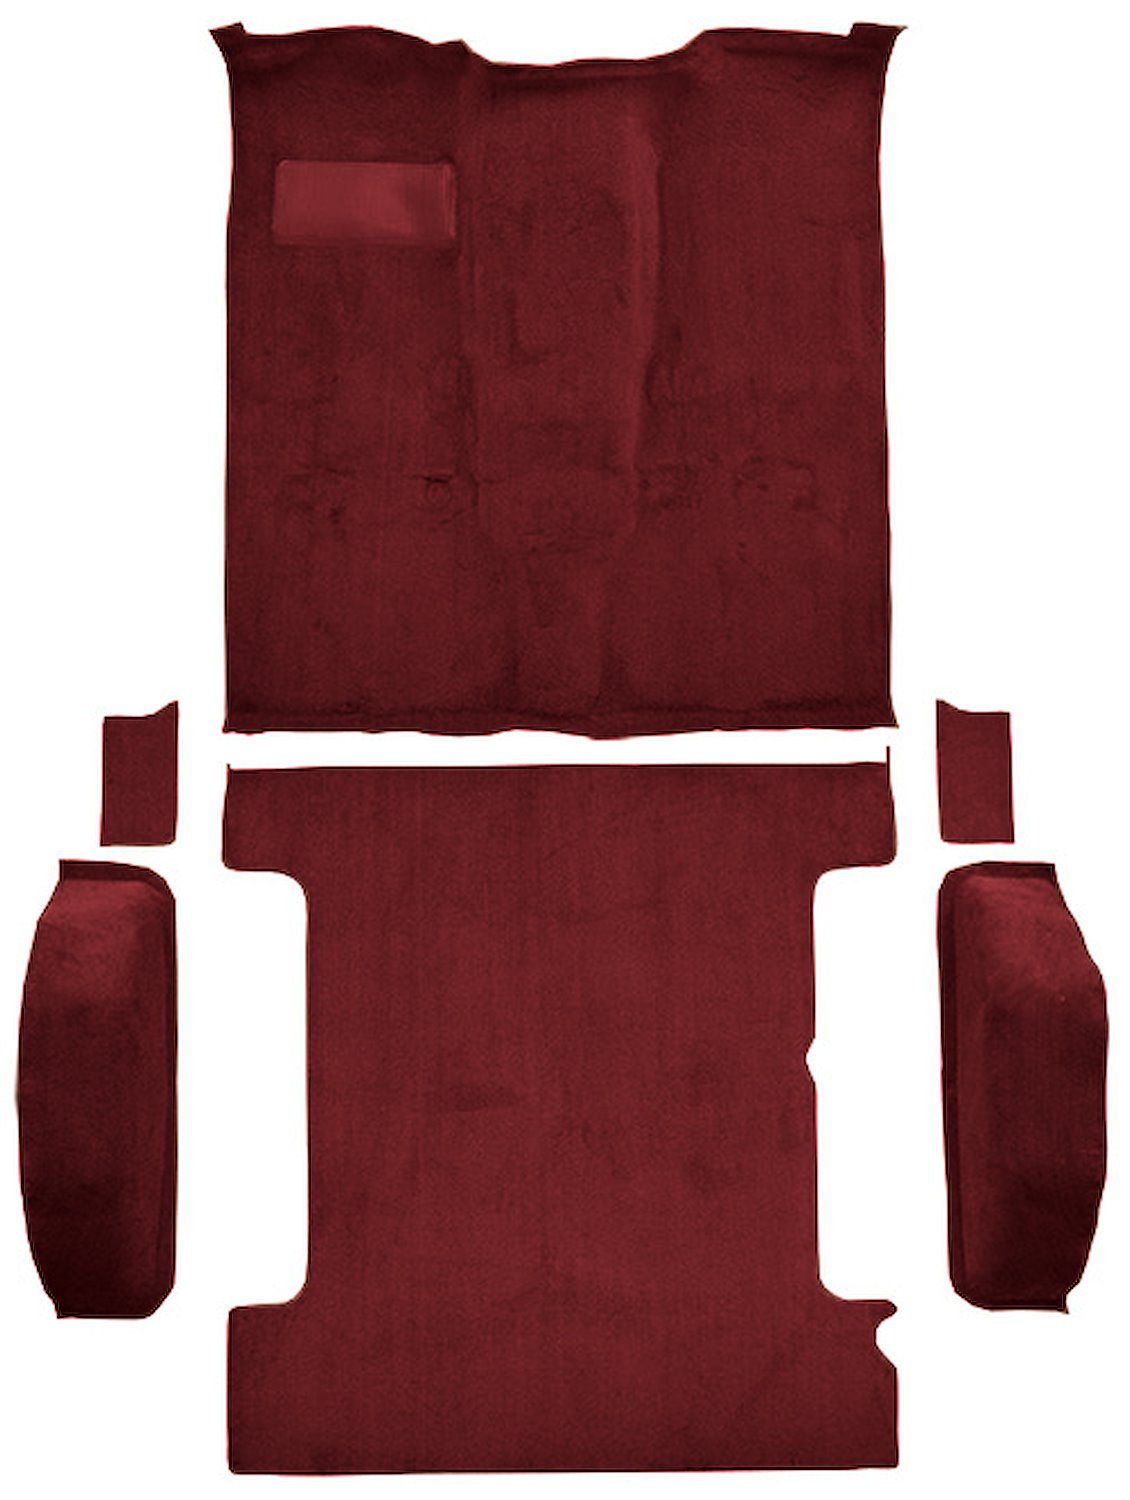 Molded Cut Pile Passenger and Cargo Area Carpet for 1981-1991 Chevrolet Blazer, GMC Jimmy [Mass Backing, 6-Piece, Maroon]